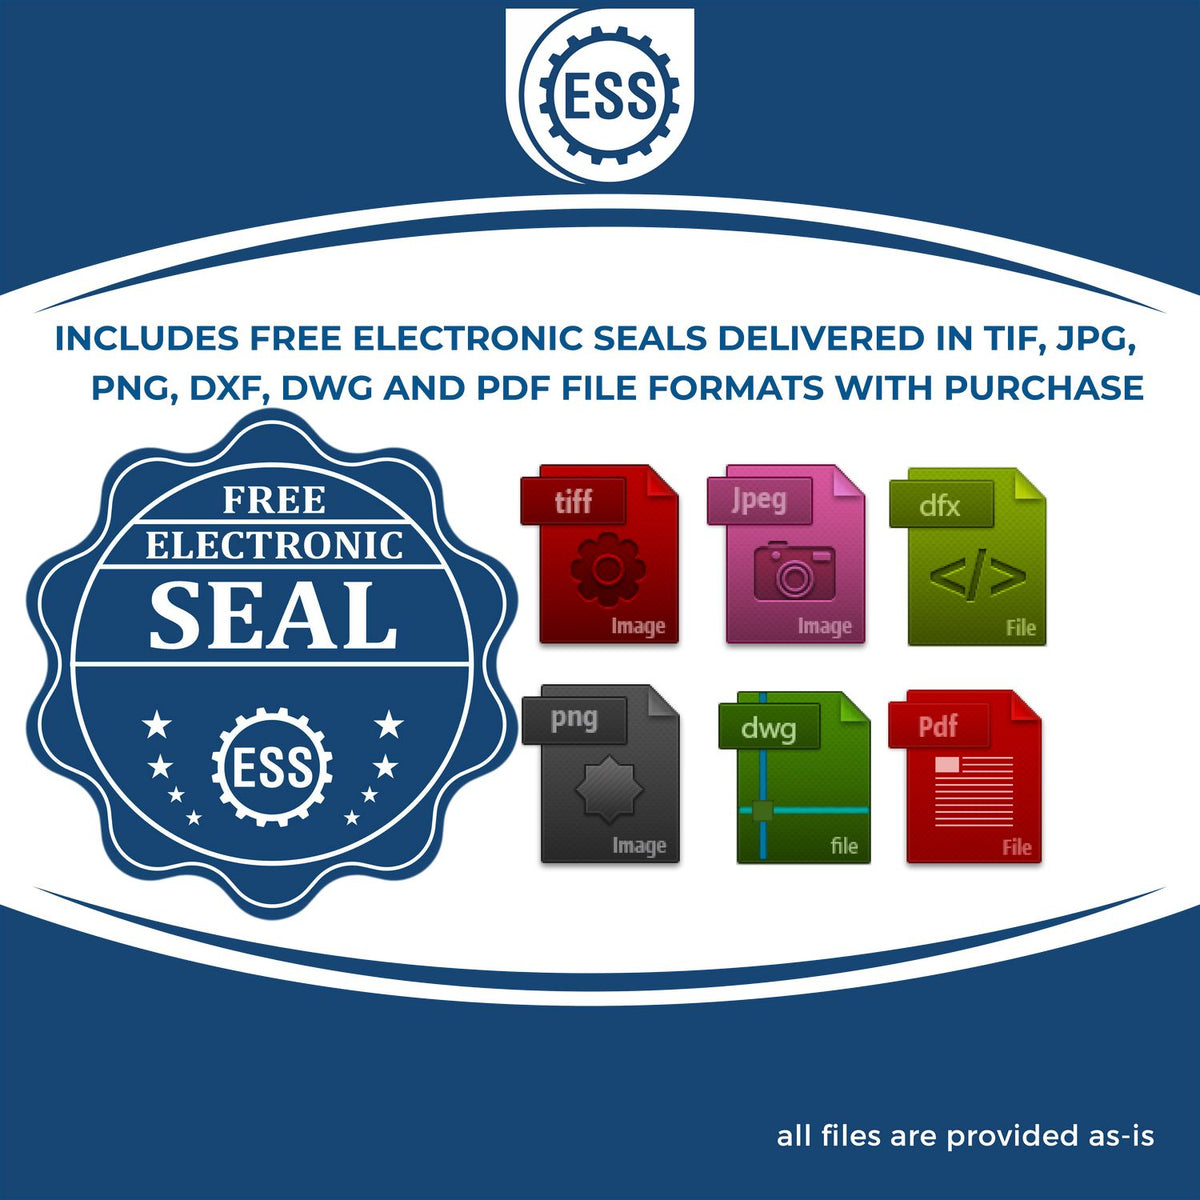 An infographic for the free electronic seal for the State of Nebraska Long Reach Architectural Embossing Seal illustrating the different file type icons such as DXF, DWG, TIF, JPG and PNG.